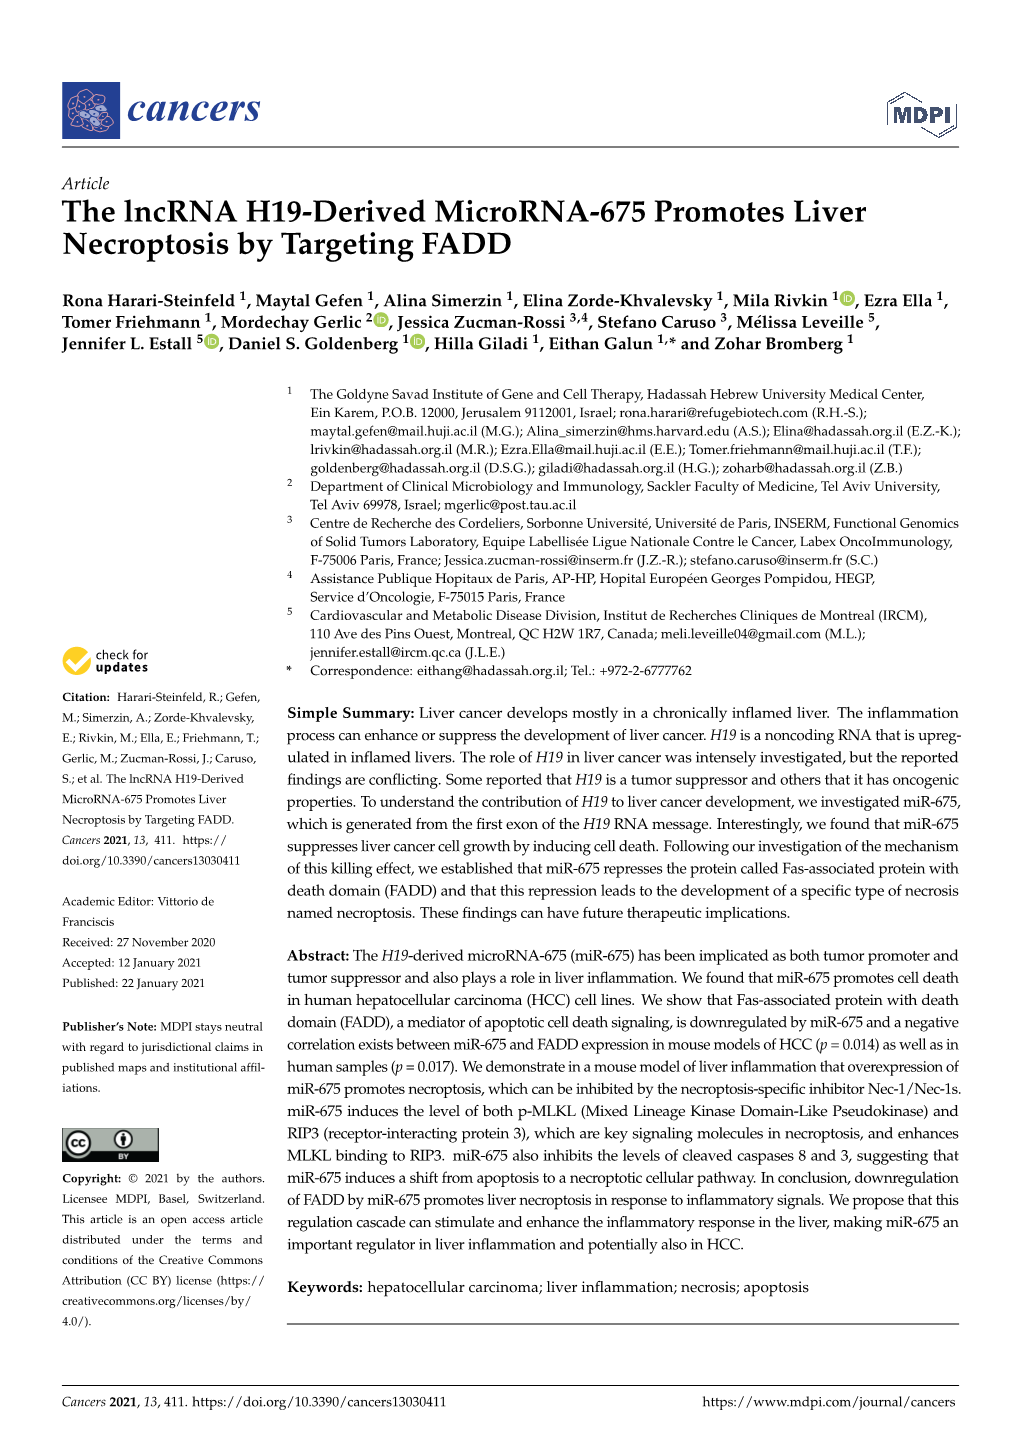 The Lncrna H19-Derived Microrna-675 Promotes Liver Necroptosis by Targeting FADD